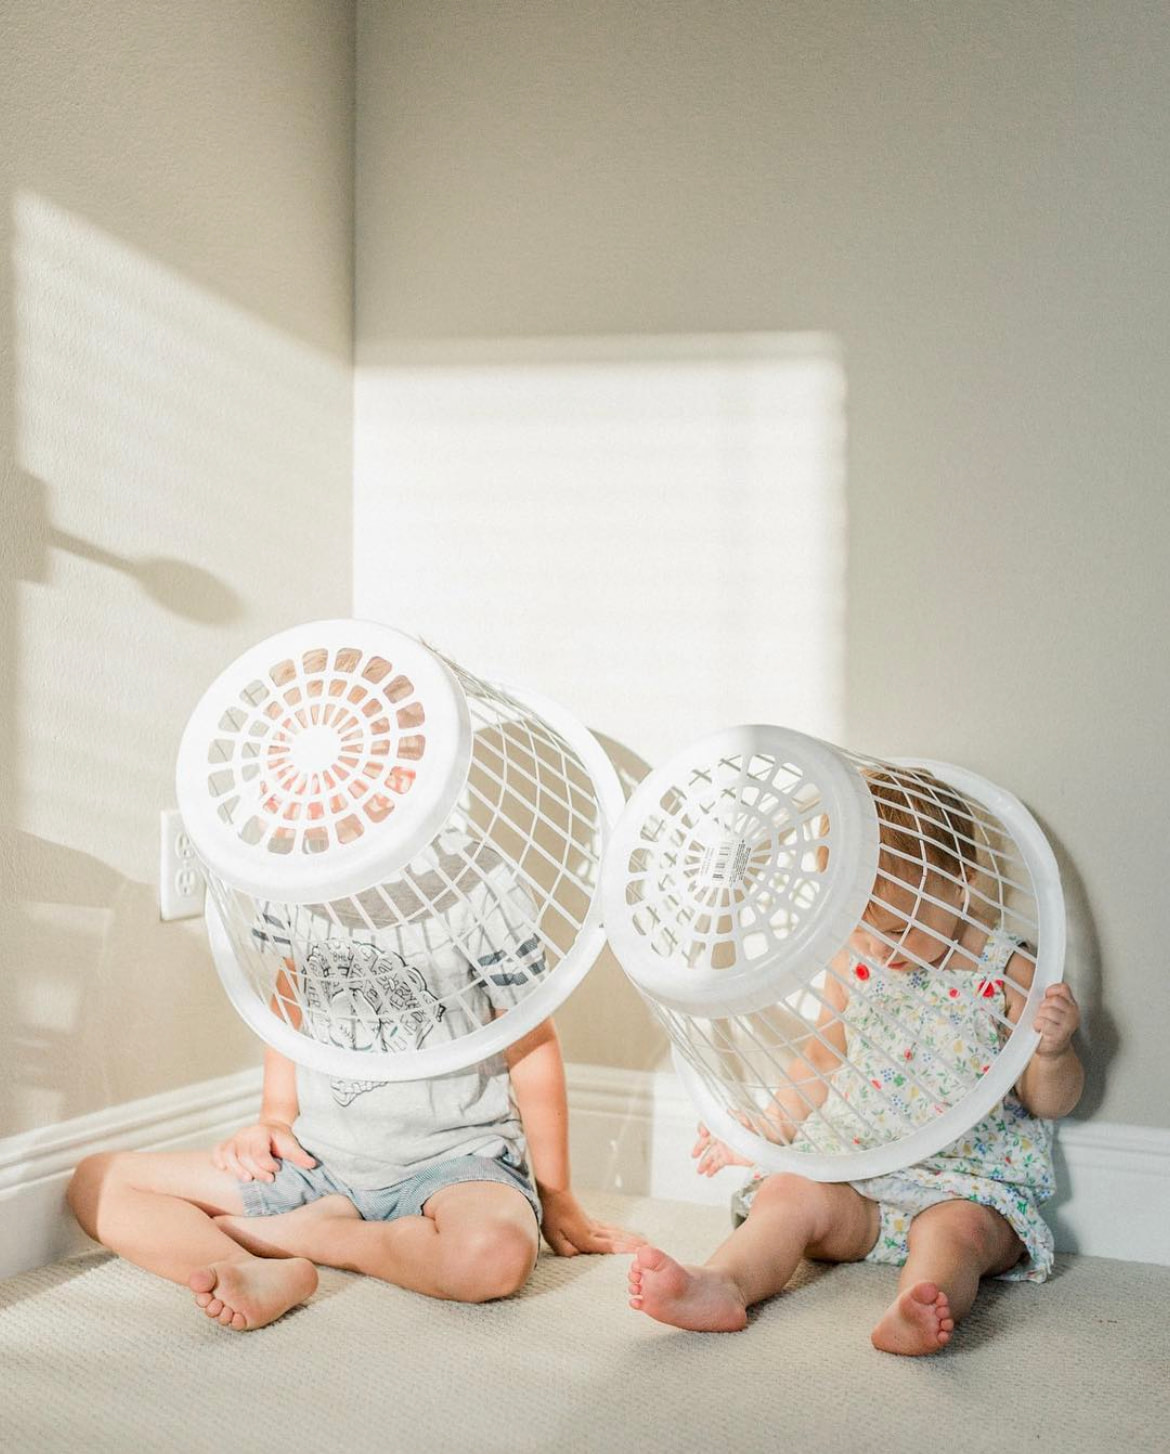 Kids playing at home in window light by Orlando lifestyle photographer